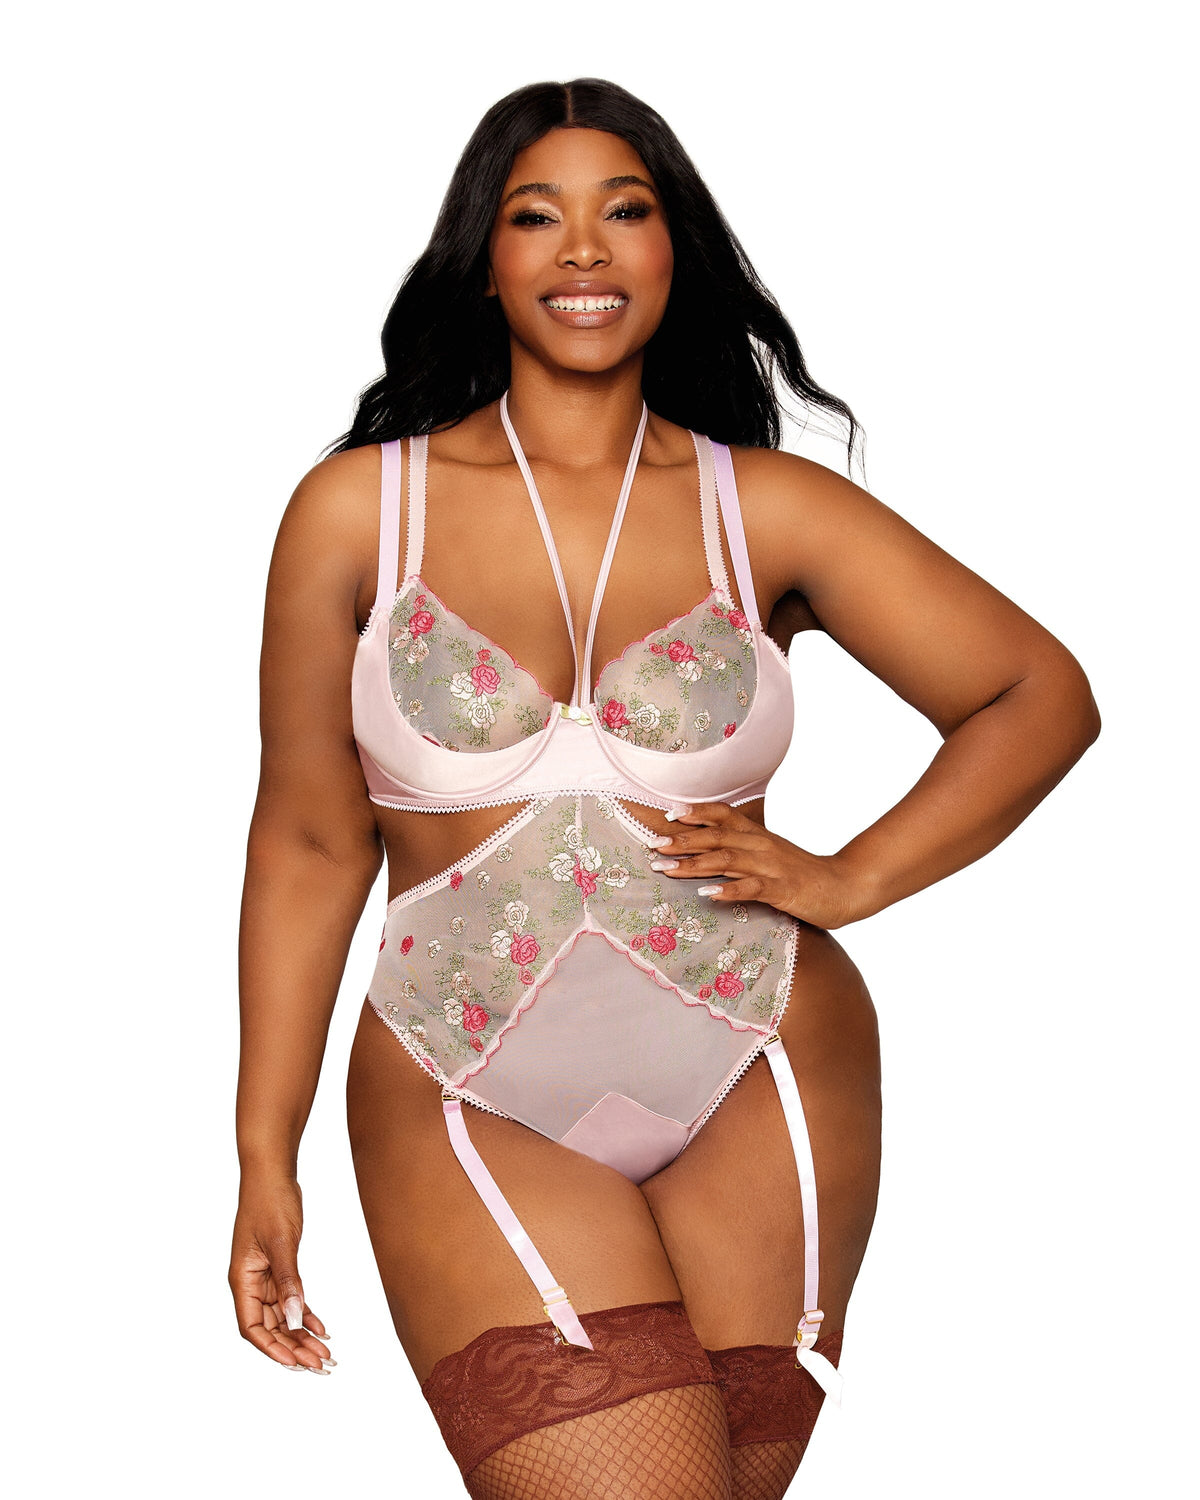 Dreamgirl Plus Size Vintage Rose Embroidery Bra and Open Cup Teddy Set Bra Set Dreamgirl 